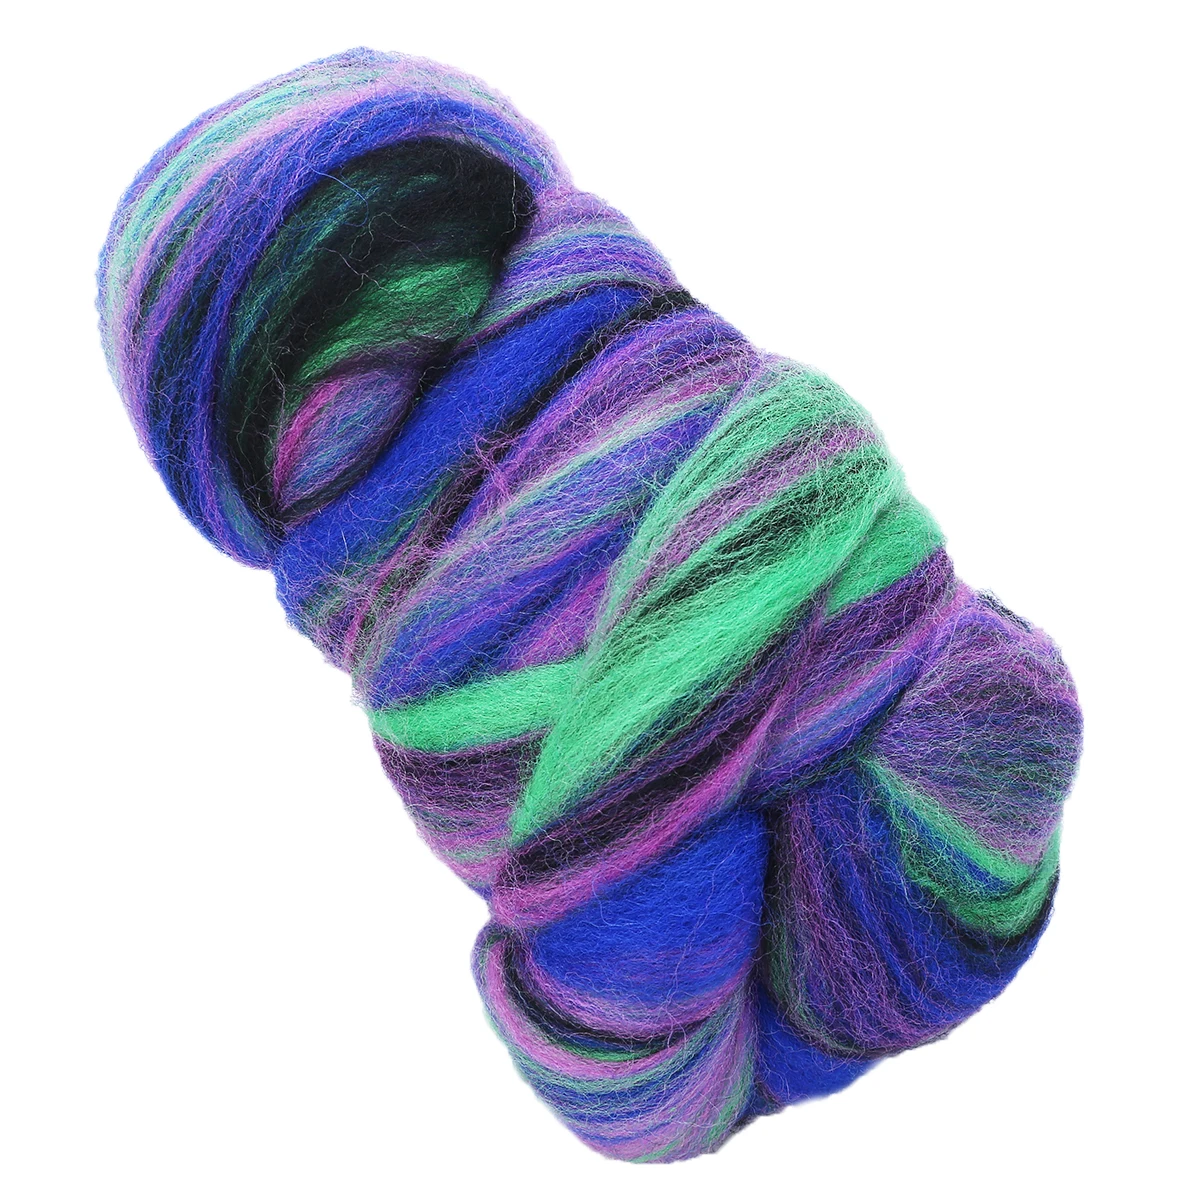 114g Multi-color Merino Wool Mulberry Silk Blend Combed Top Wool Roving for Needle Felted Wool Knitted Blanket 4 oz